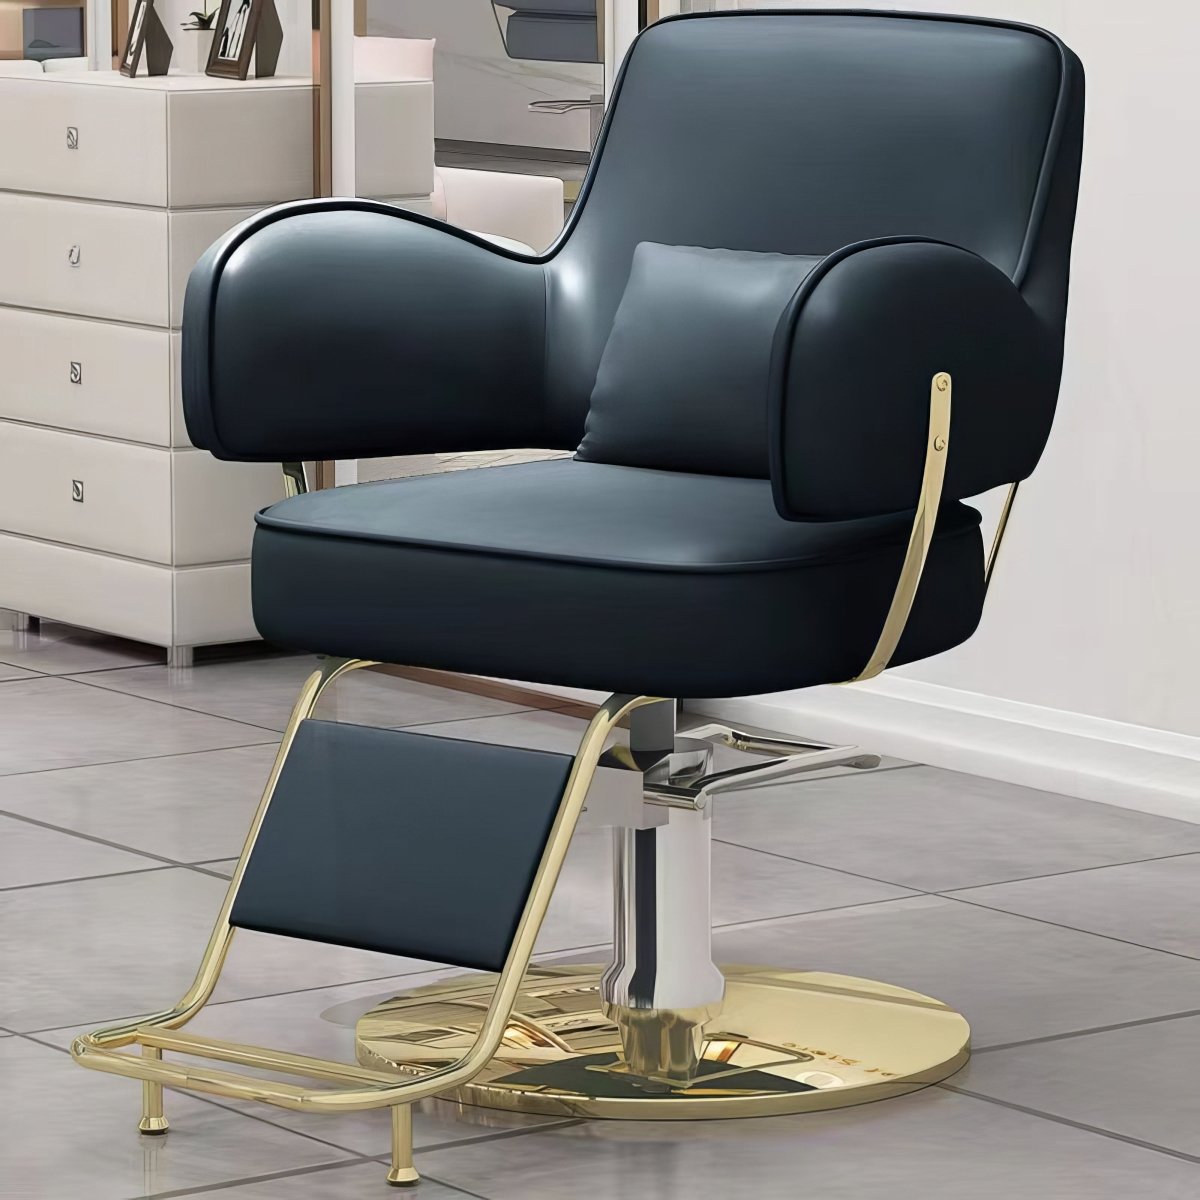 Modern All Purpose Hydraulic Barber Chair - 004 - GreenLife-Barber chair